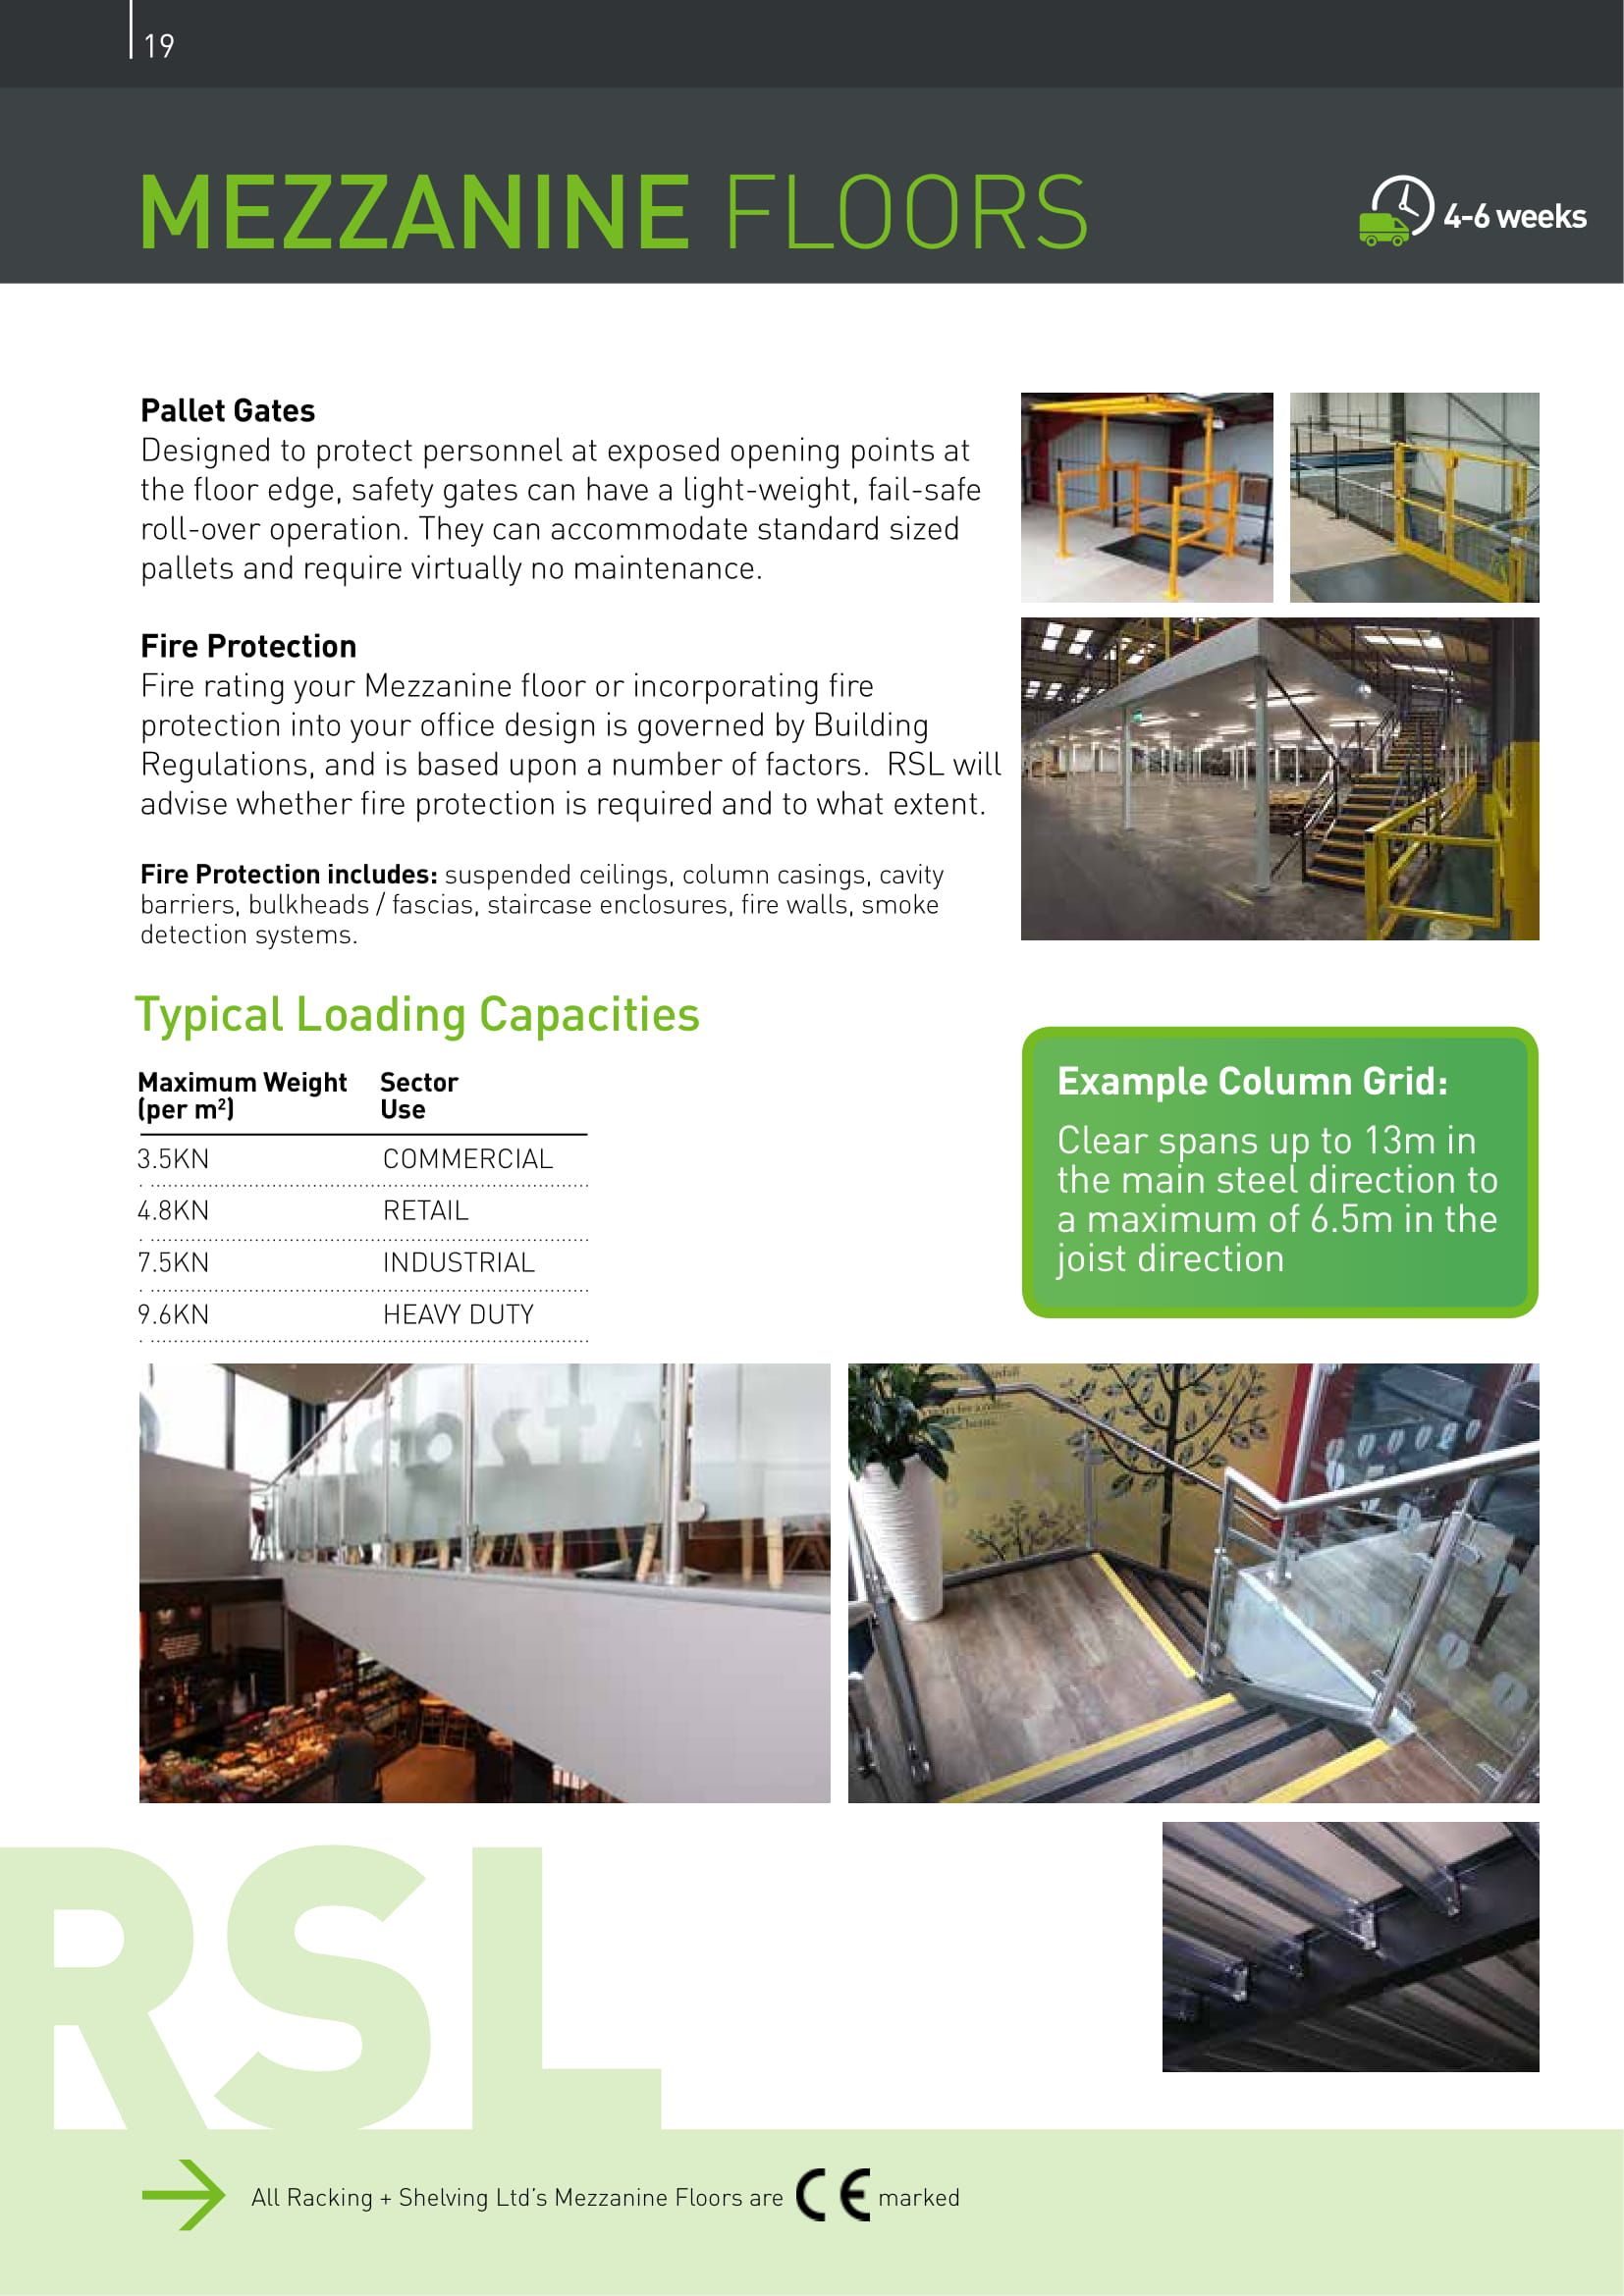 Mezzanine floors brochure page showcasing pallet gates and loading capacities